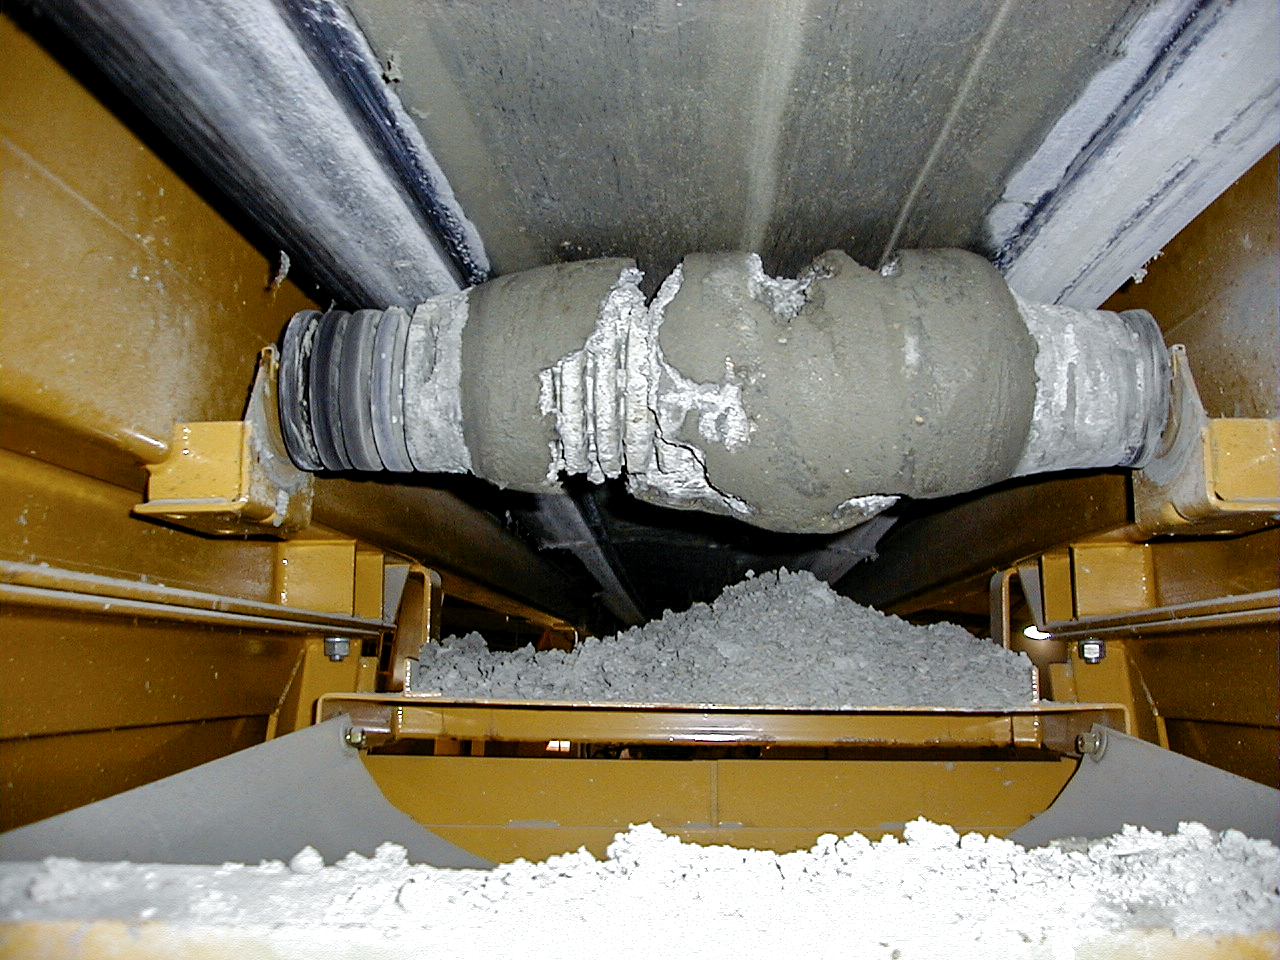 Return roll covered in material carryback on a belt conveyor.